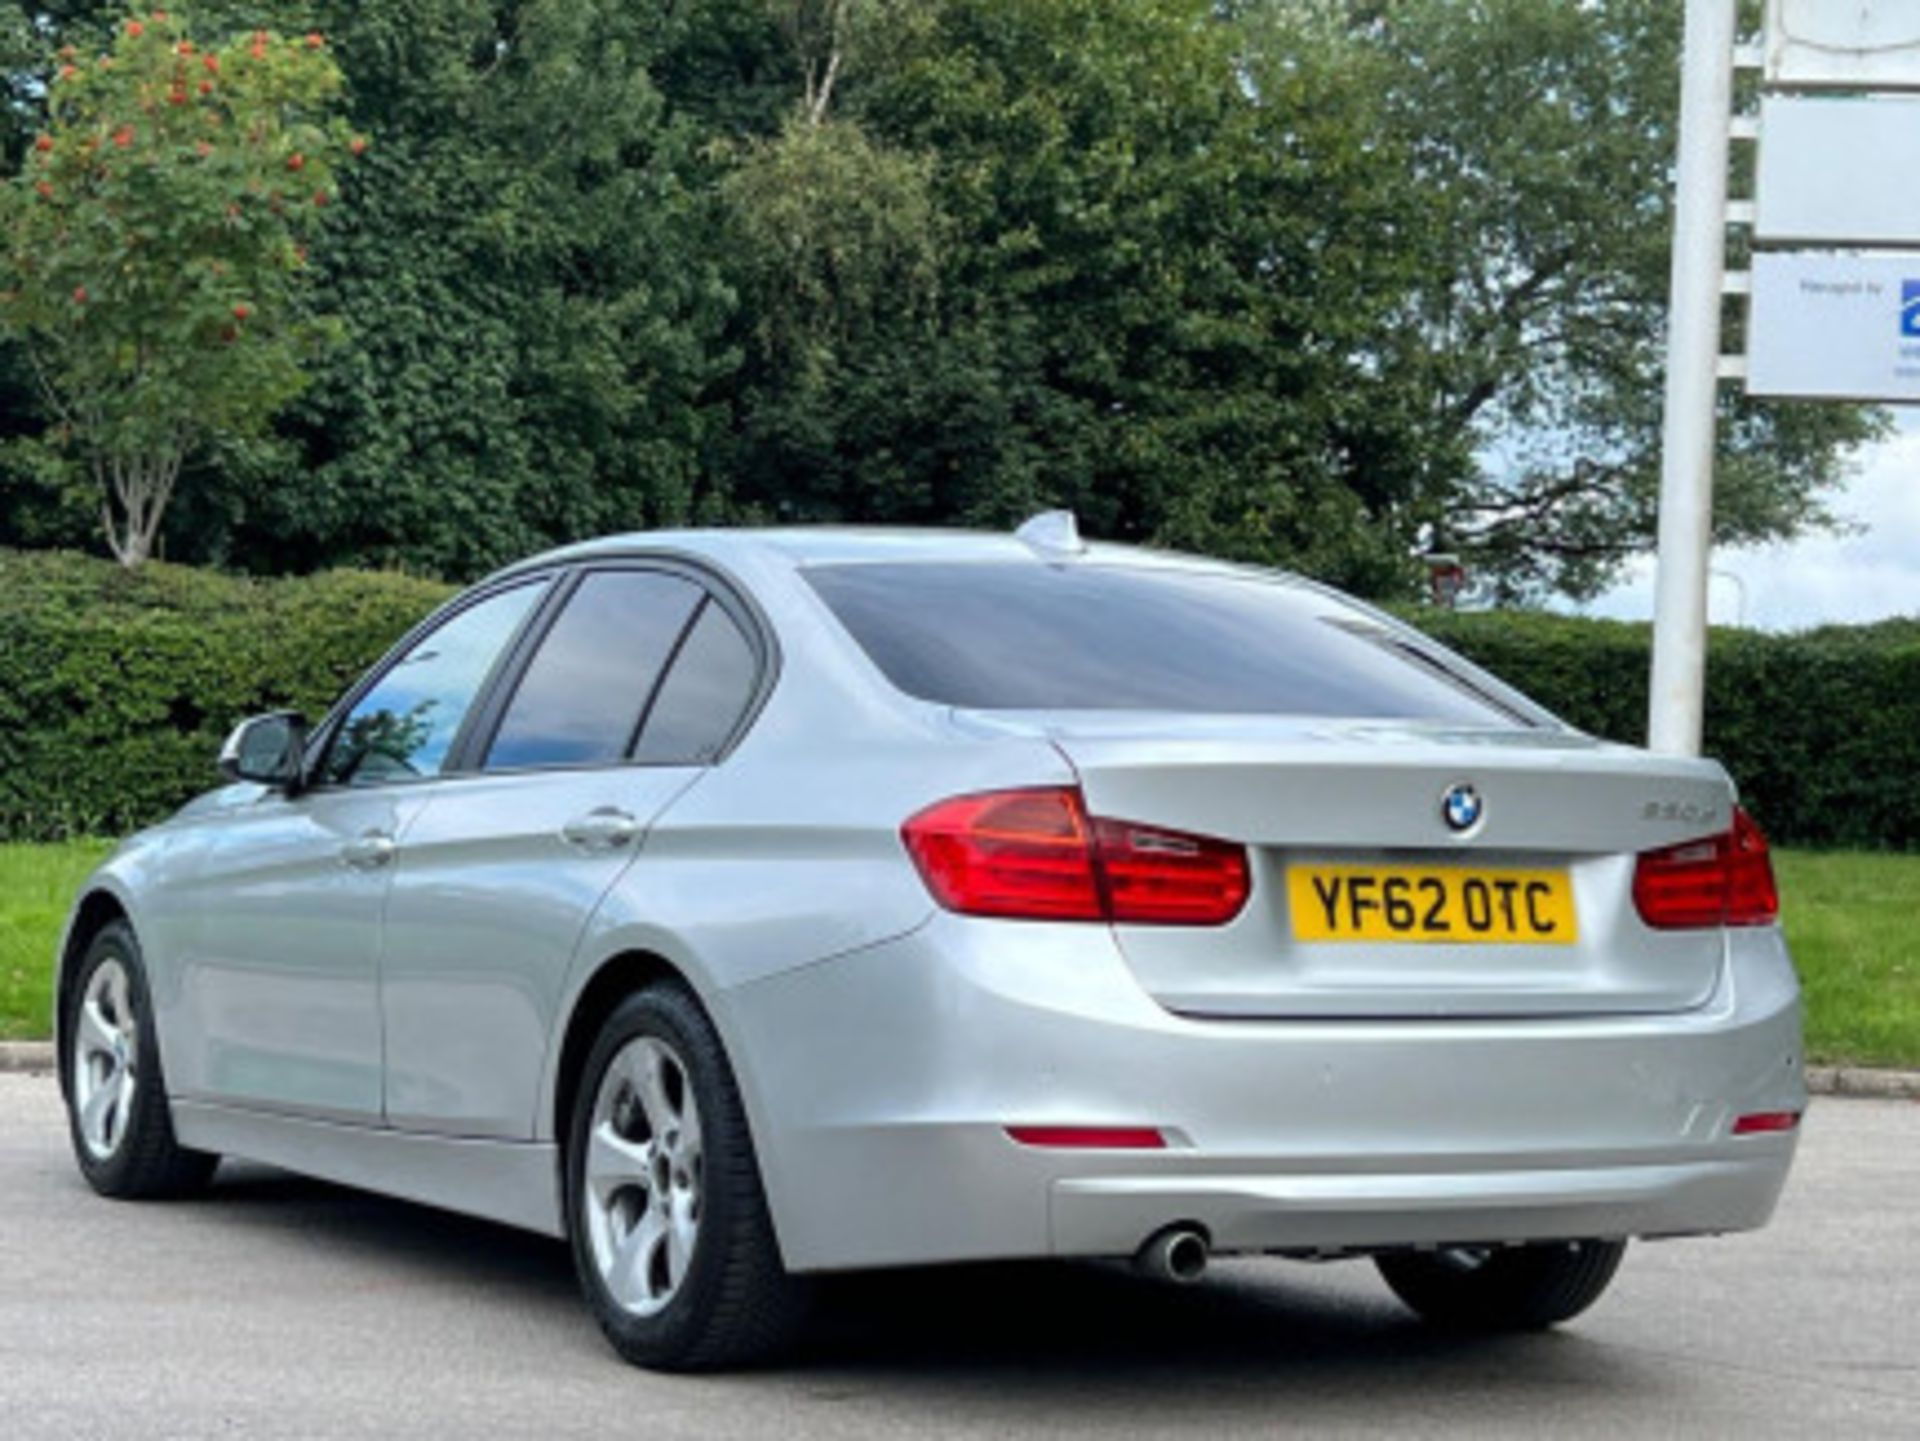 BMW 3 SERIES 2.0 DIESEL ED START STOP - A WELL-MAINTAINED GEM >>--NO VAT ON HAMMER--<< - Image 129 of 229